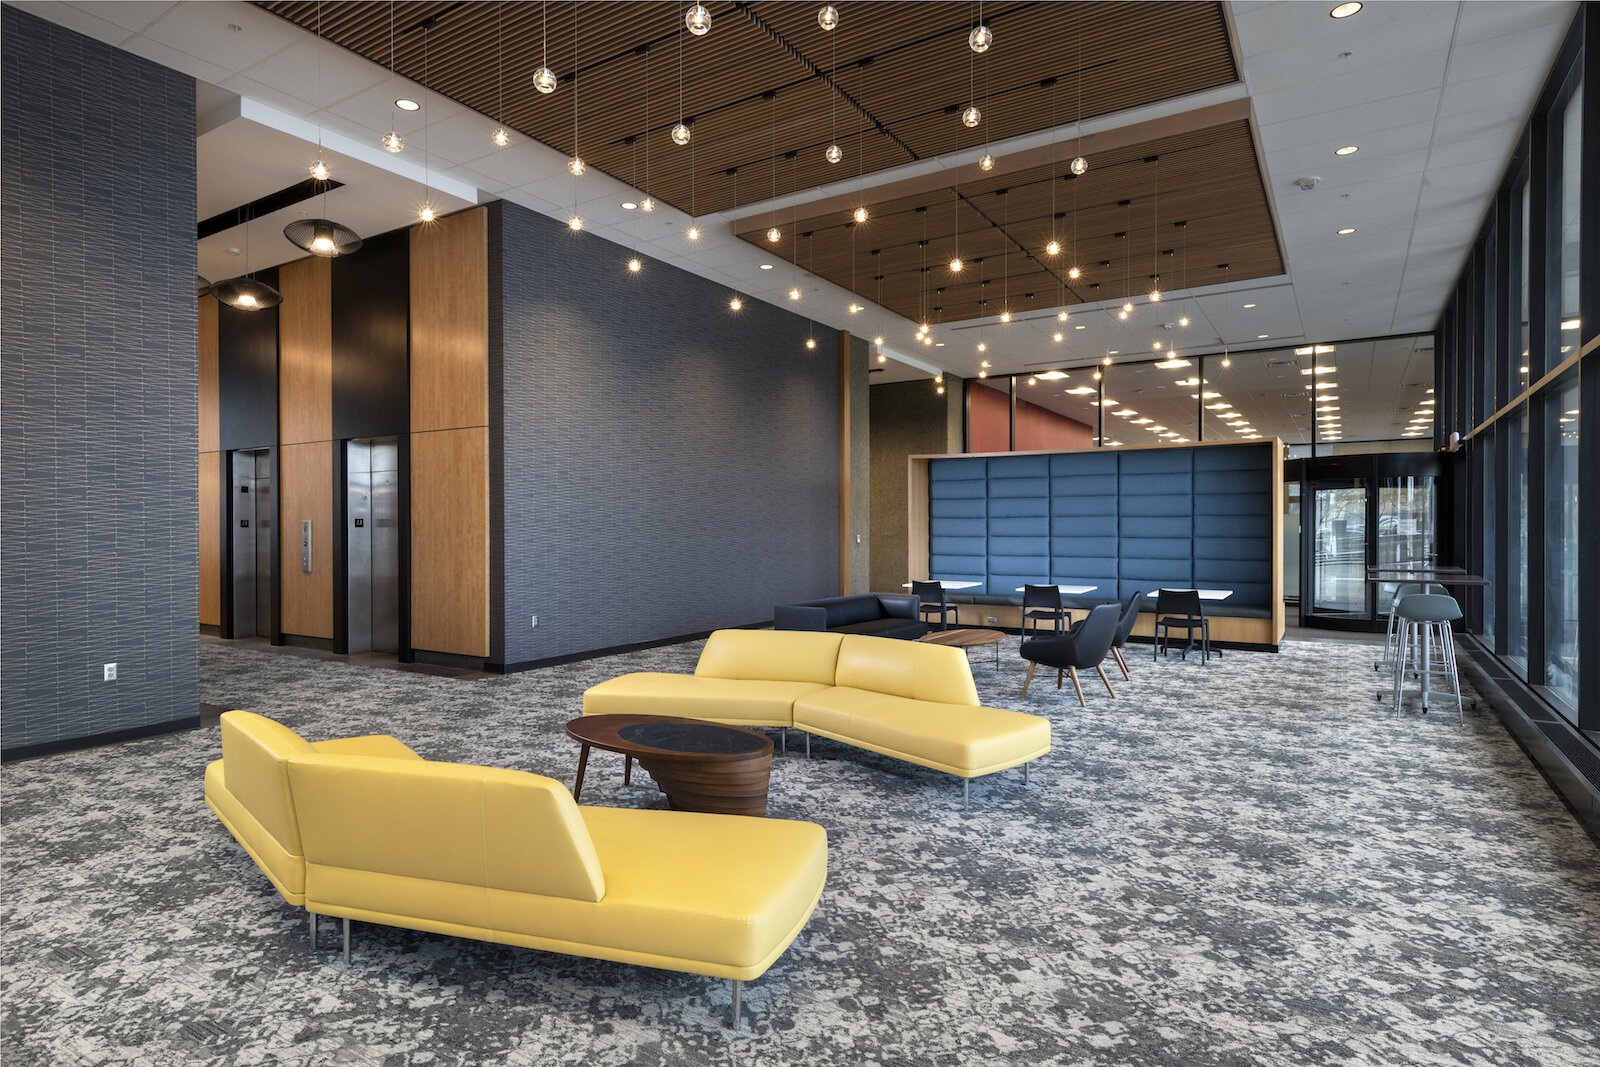 In a recent renovation at Abridge Pointe, Design Collaborative opened a former conference room and repurposed it into a larger gathering space.